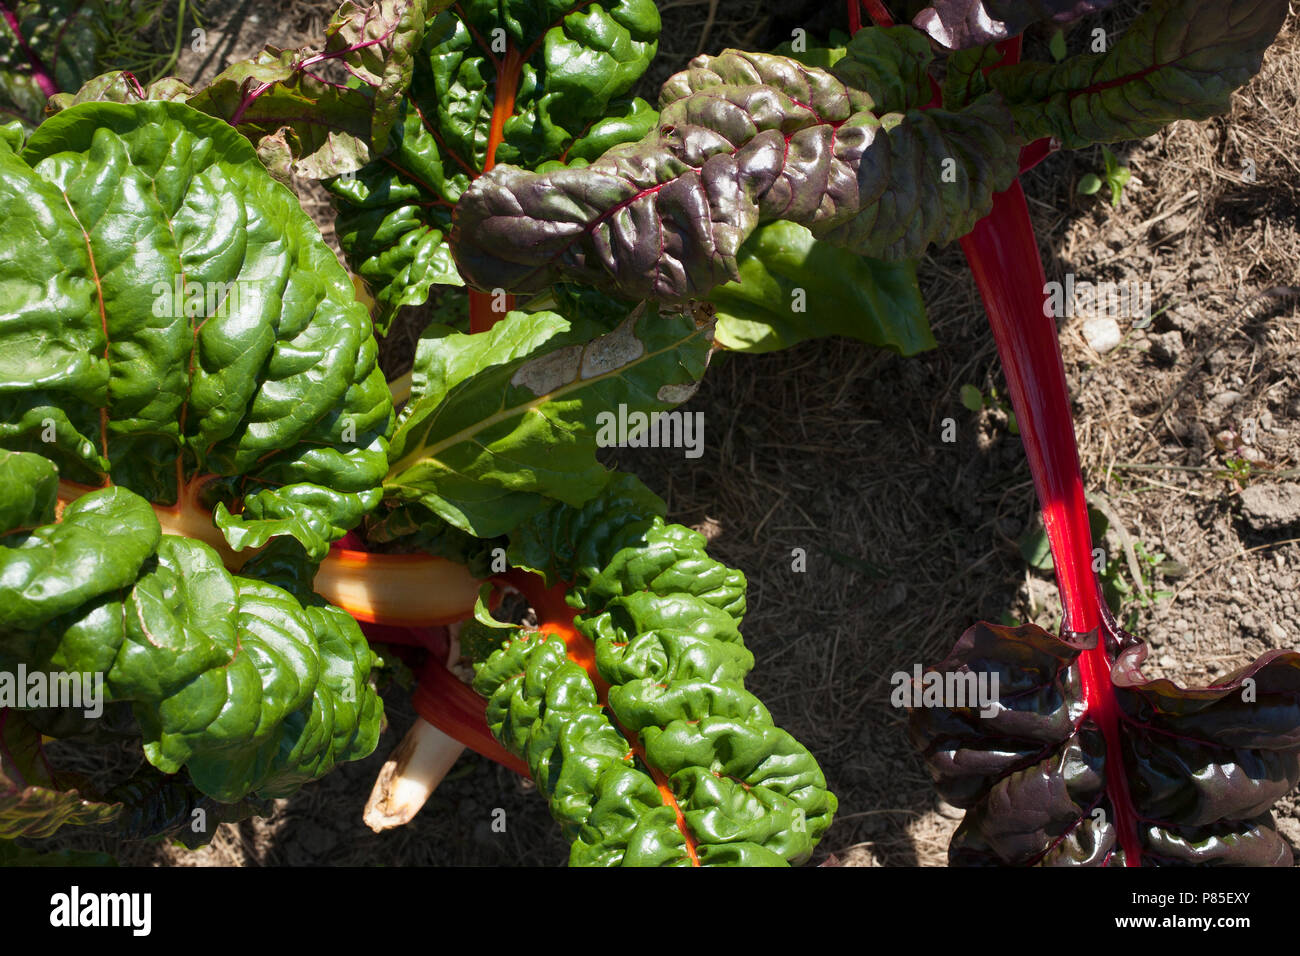 View of healthy and colorful swiss chard plants in a garden. Stock Photo